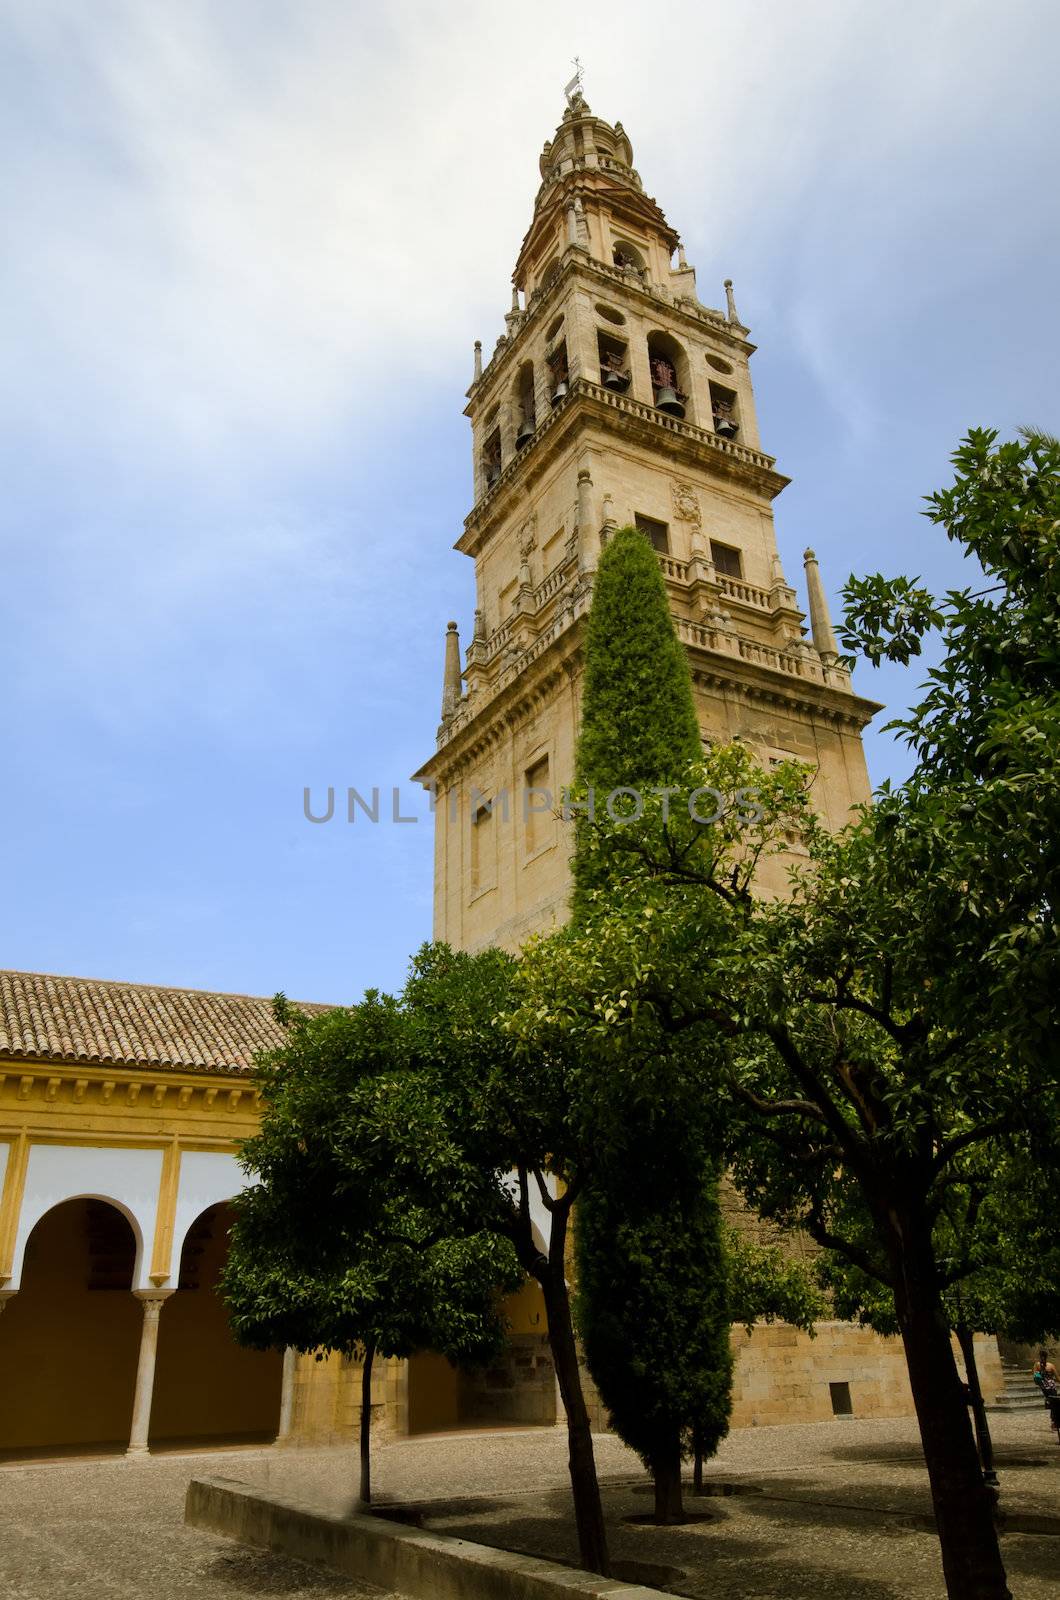 the mosque Cathedral of Cordoba